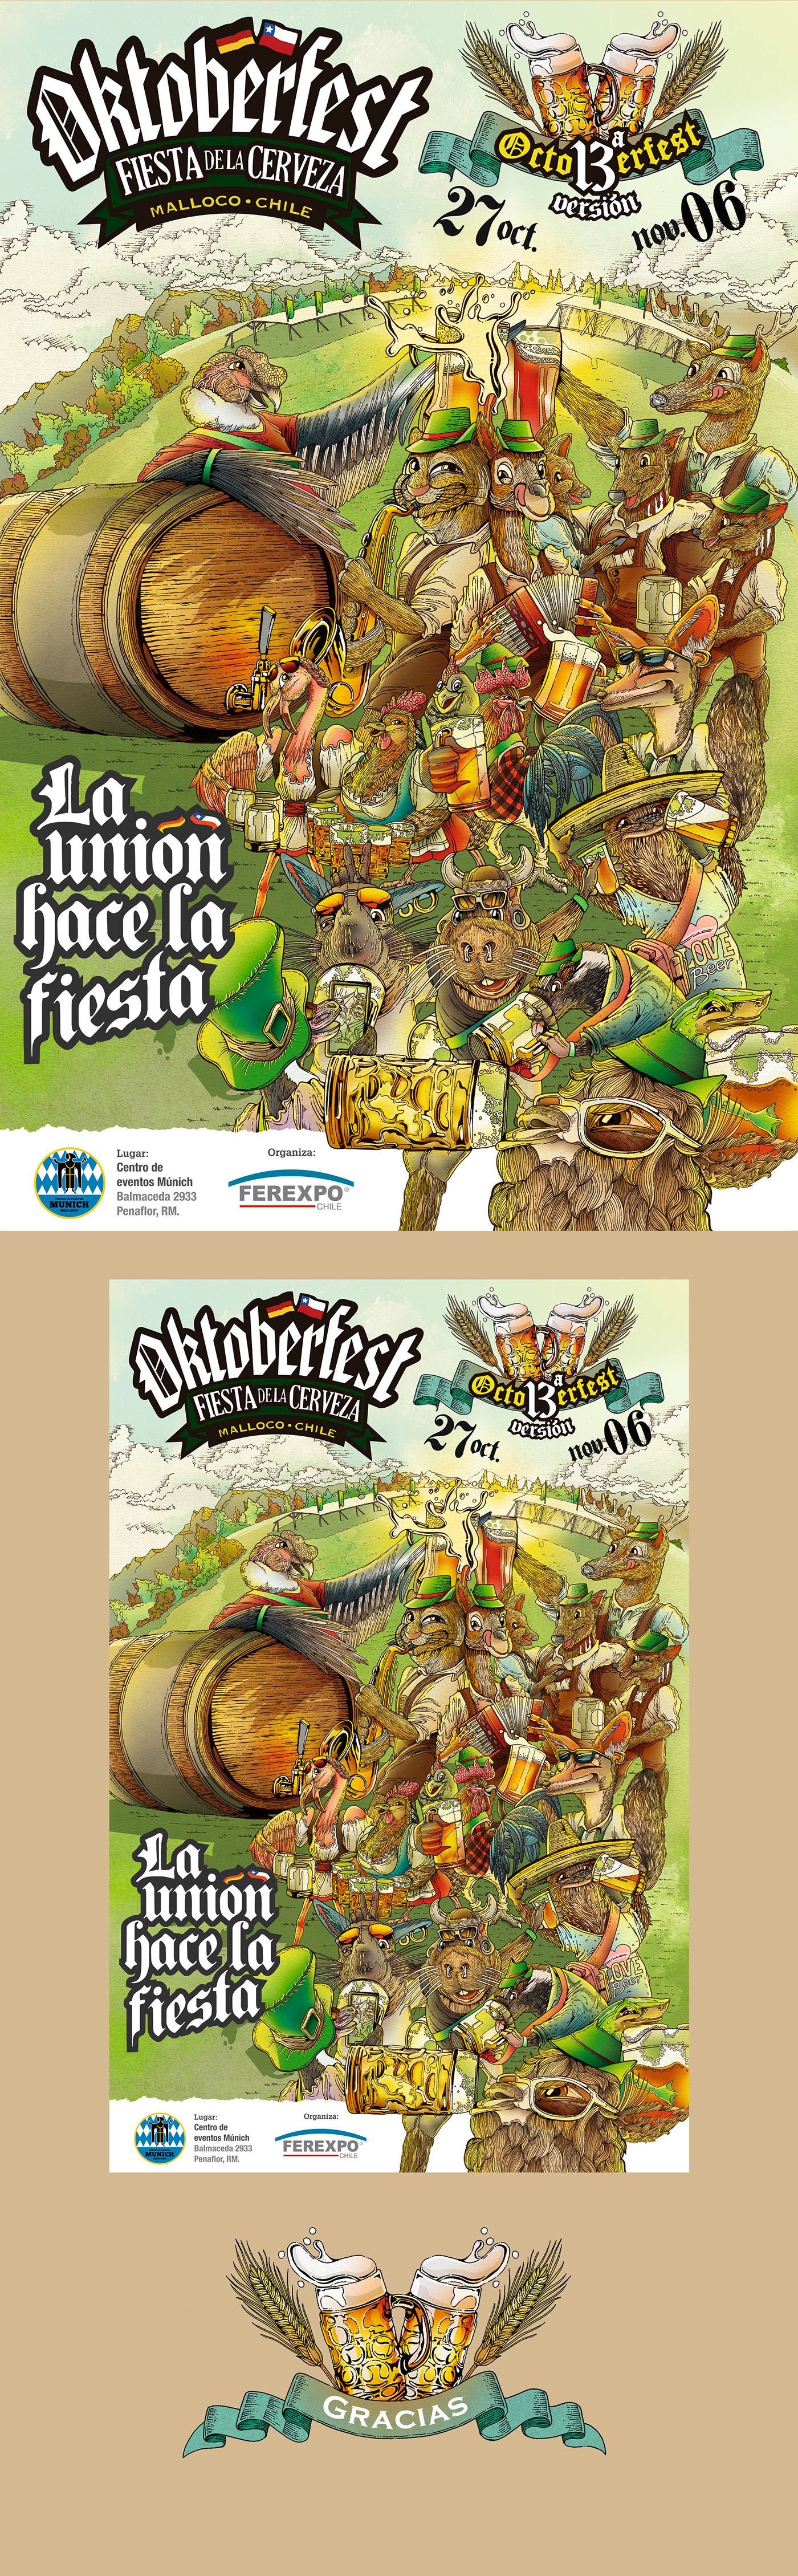 poster beer oktoberfest party chile ilustration fauna animals alcohol drink